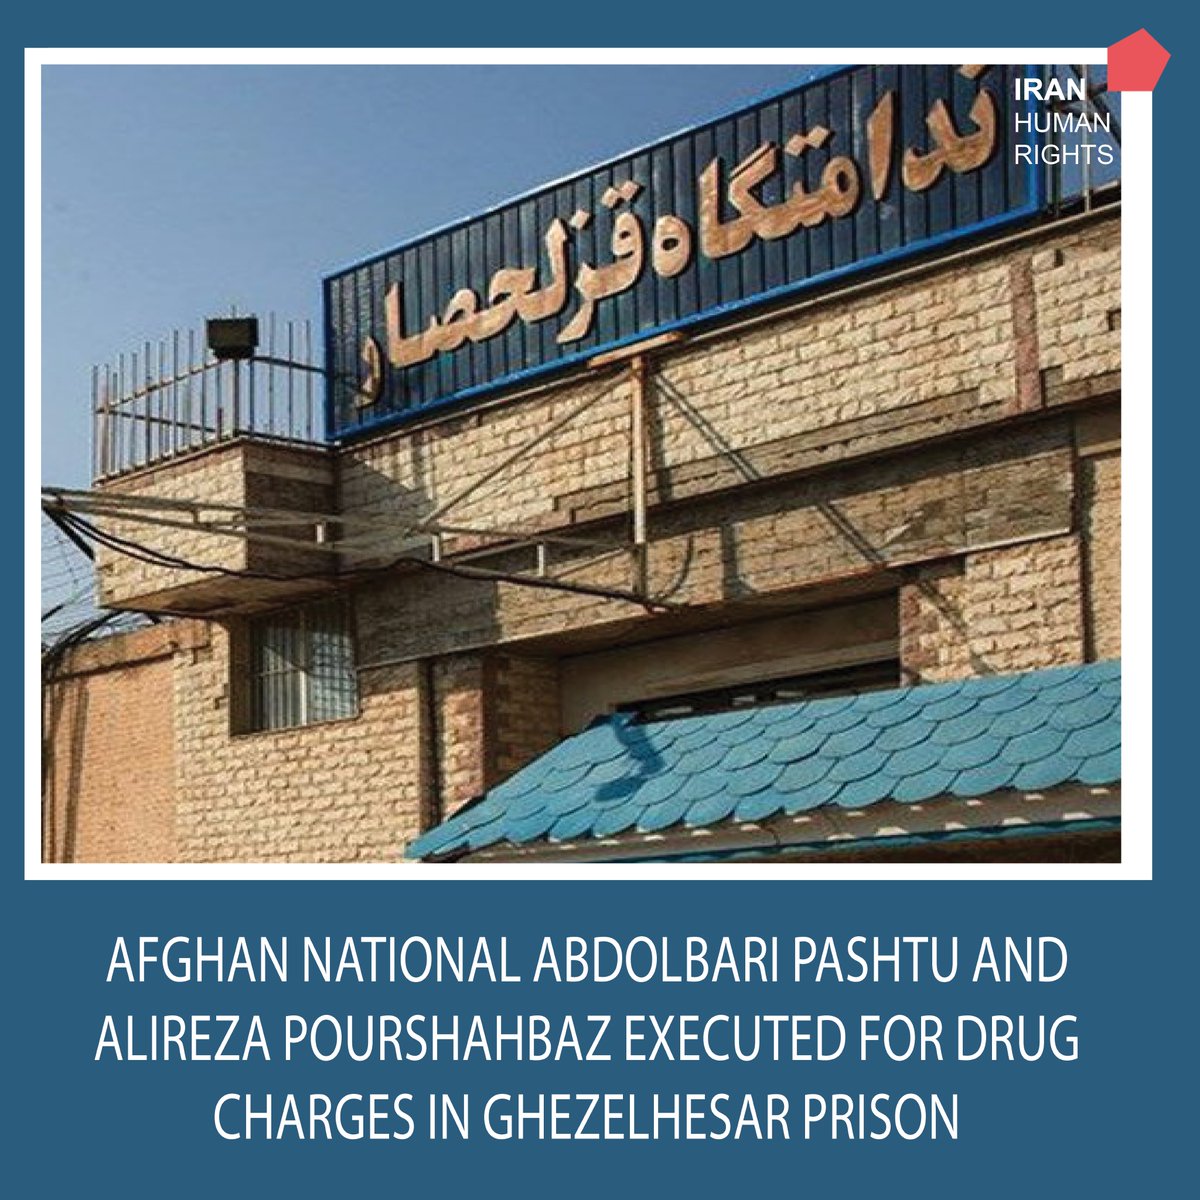 #Iran: Abdolbari Pashtu, an Afghan national and 38-year-old Alireza Pourshahbaz were executed for drug-related charges in Ghezelhesar Prison yesterday. Abdolbari is the 9th Afghan executed in 2024.

On 10 April, 80+ Iranian and international organisations and groups called for